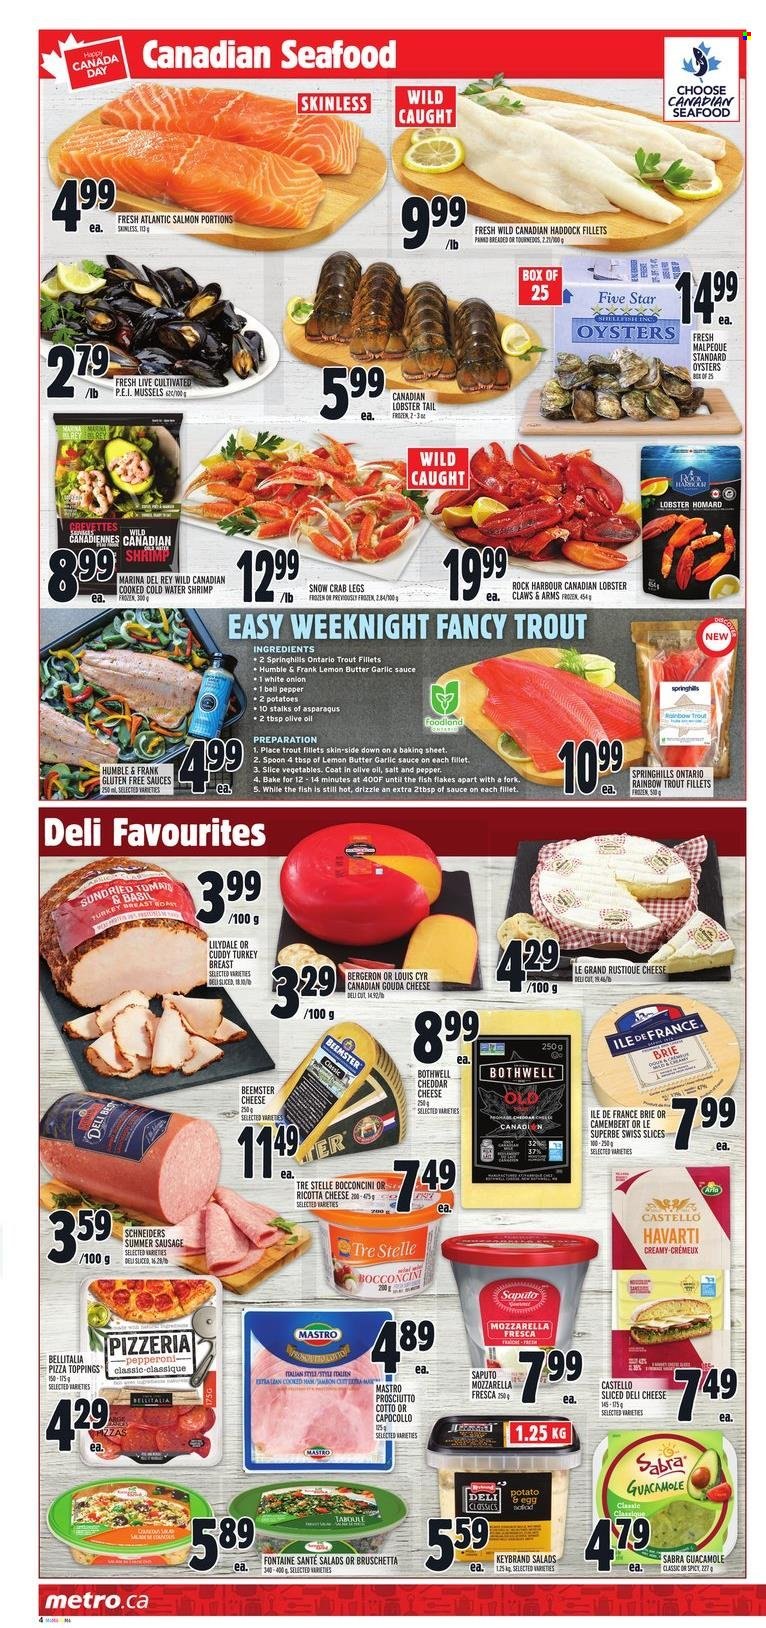 thumbnail - Metro Flyer - June 30, 2022 - July 06, 2022 - Sales products - potatoes, onion, lobster, mussels, salmon, trout, haddock, oysters, seafood, crab legs, crab, fish, lobster tail, shrimps, pizza, prosciutto, sausage, summer sausage, pepperoni, guacamole, bocconcini, gouda, Havarti, cheddar, brie, eggs, pepper, garlic sauce, turkey breast, turkey, fork, spoon, camembert, ricotta. Page 4.